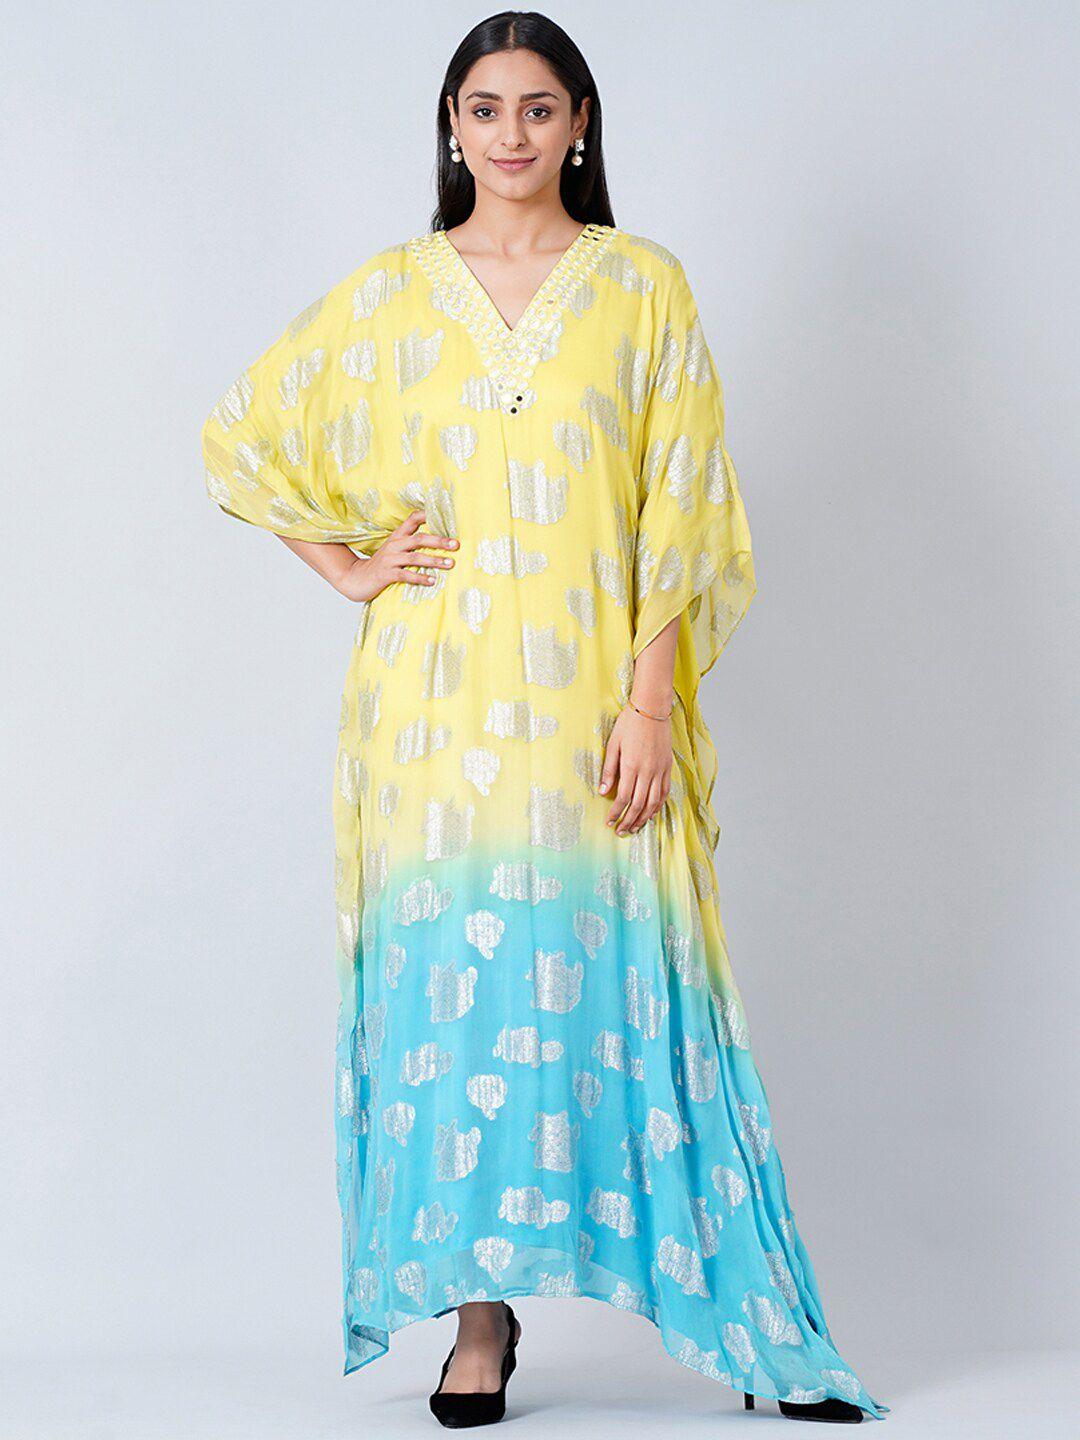 first resort by ramola bachchan tie and dyed kimono sleeve georgette kaftan maxi dress